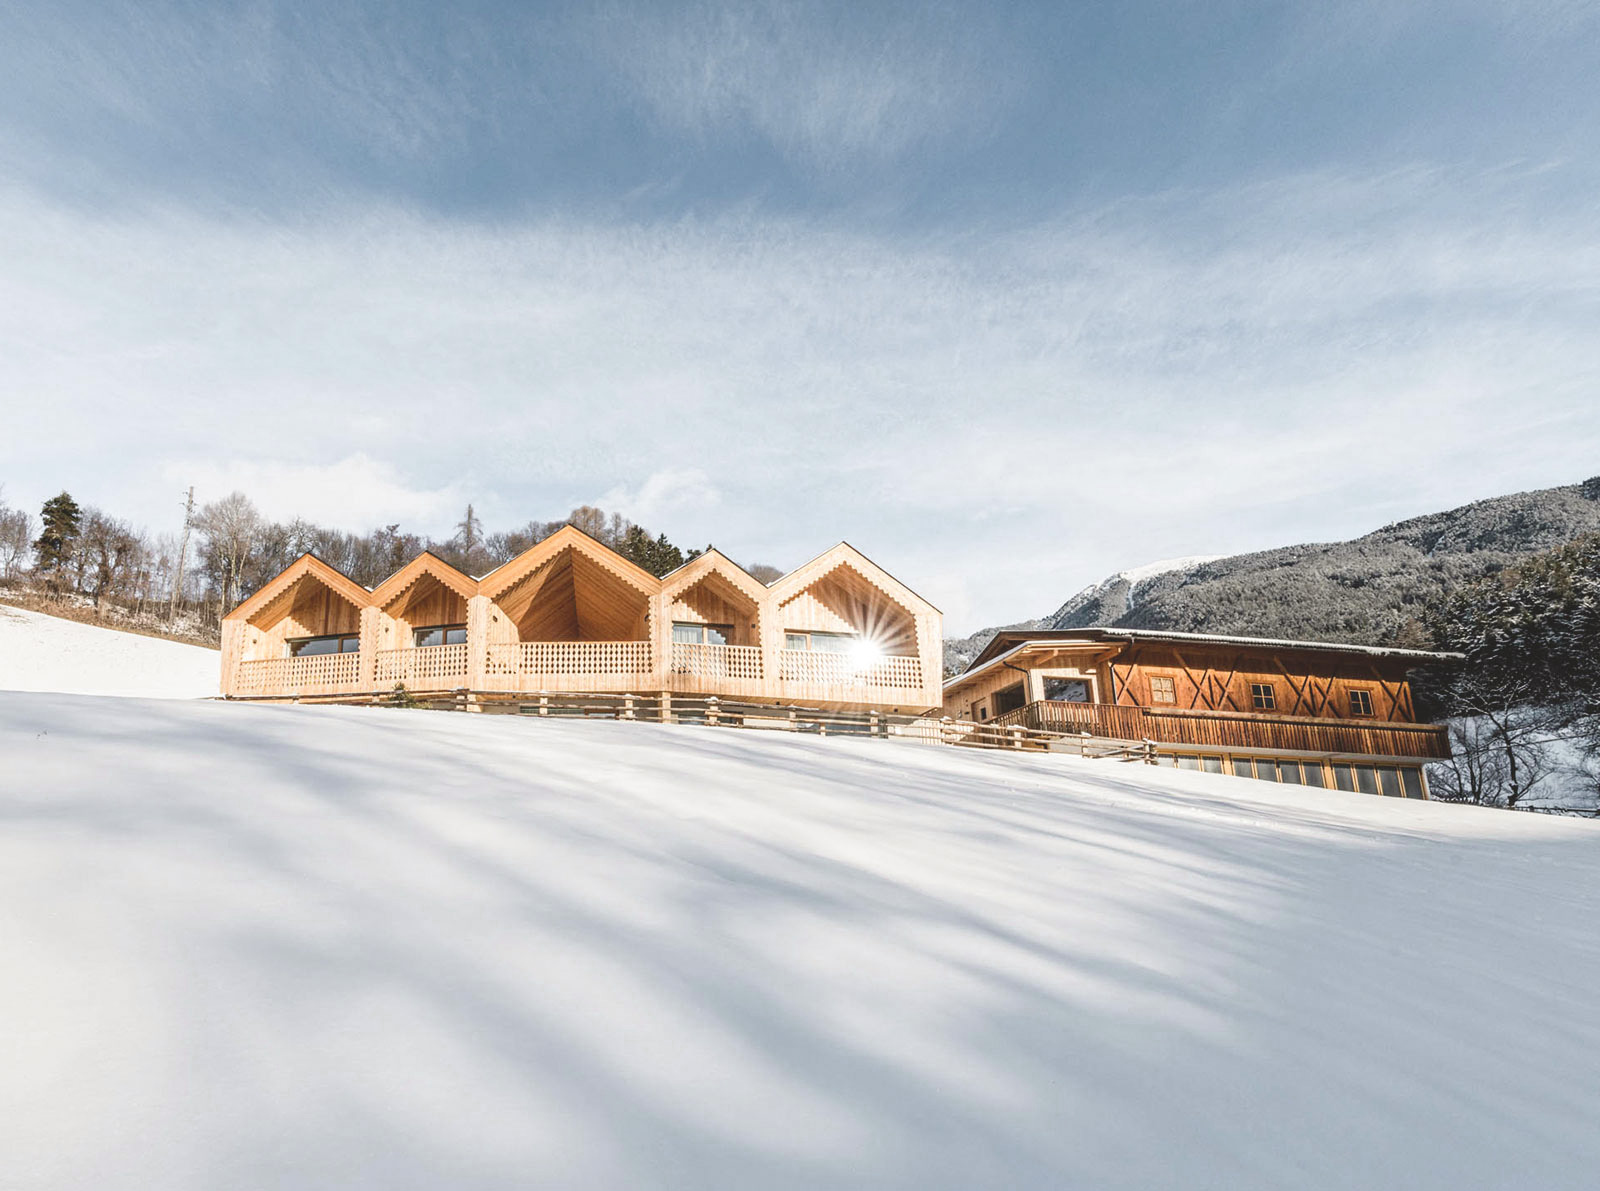 Pretty Hotels: Where to Stay in Your Ski Holidays (Image 12)